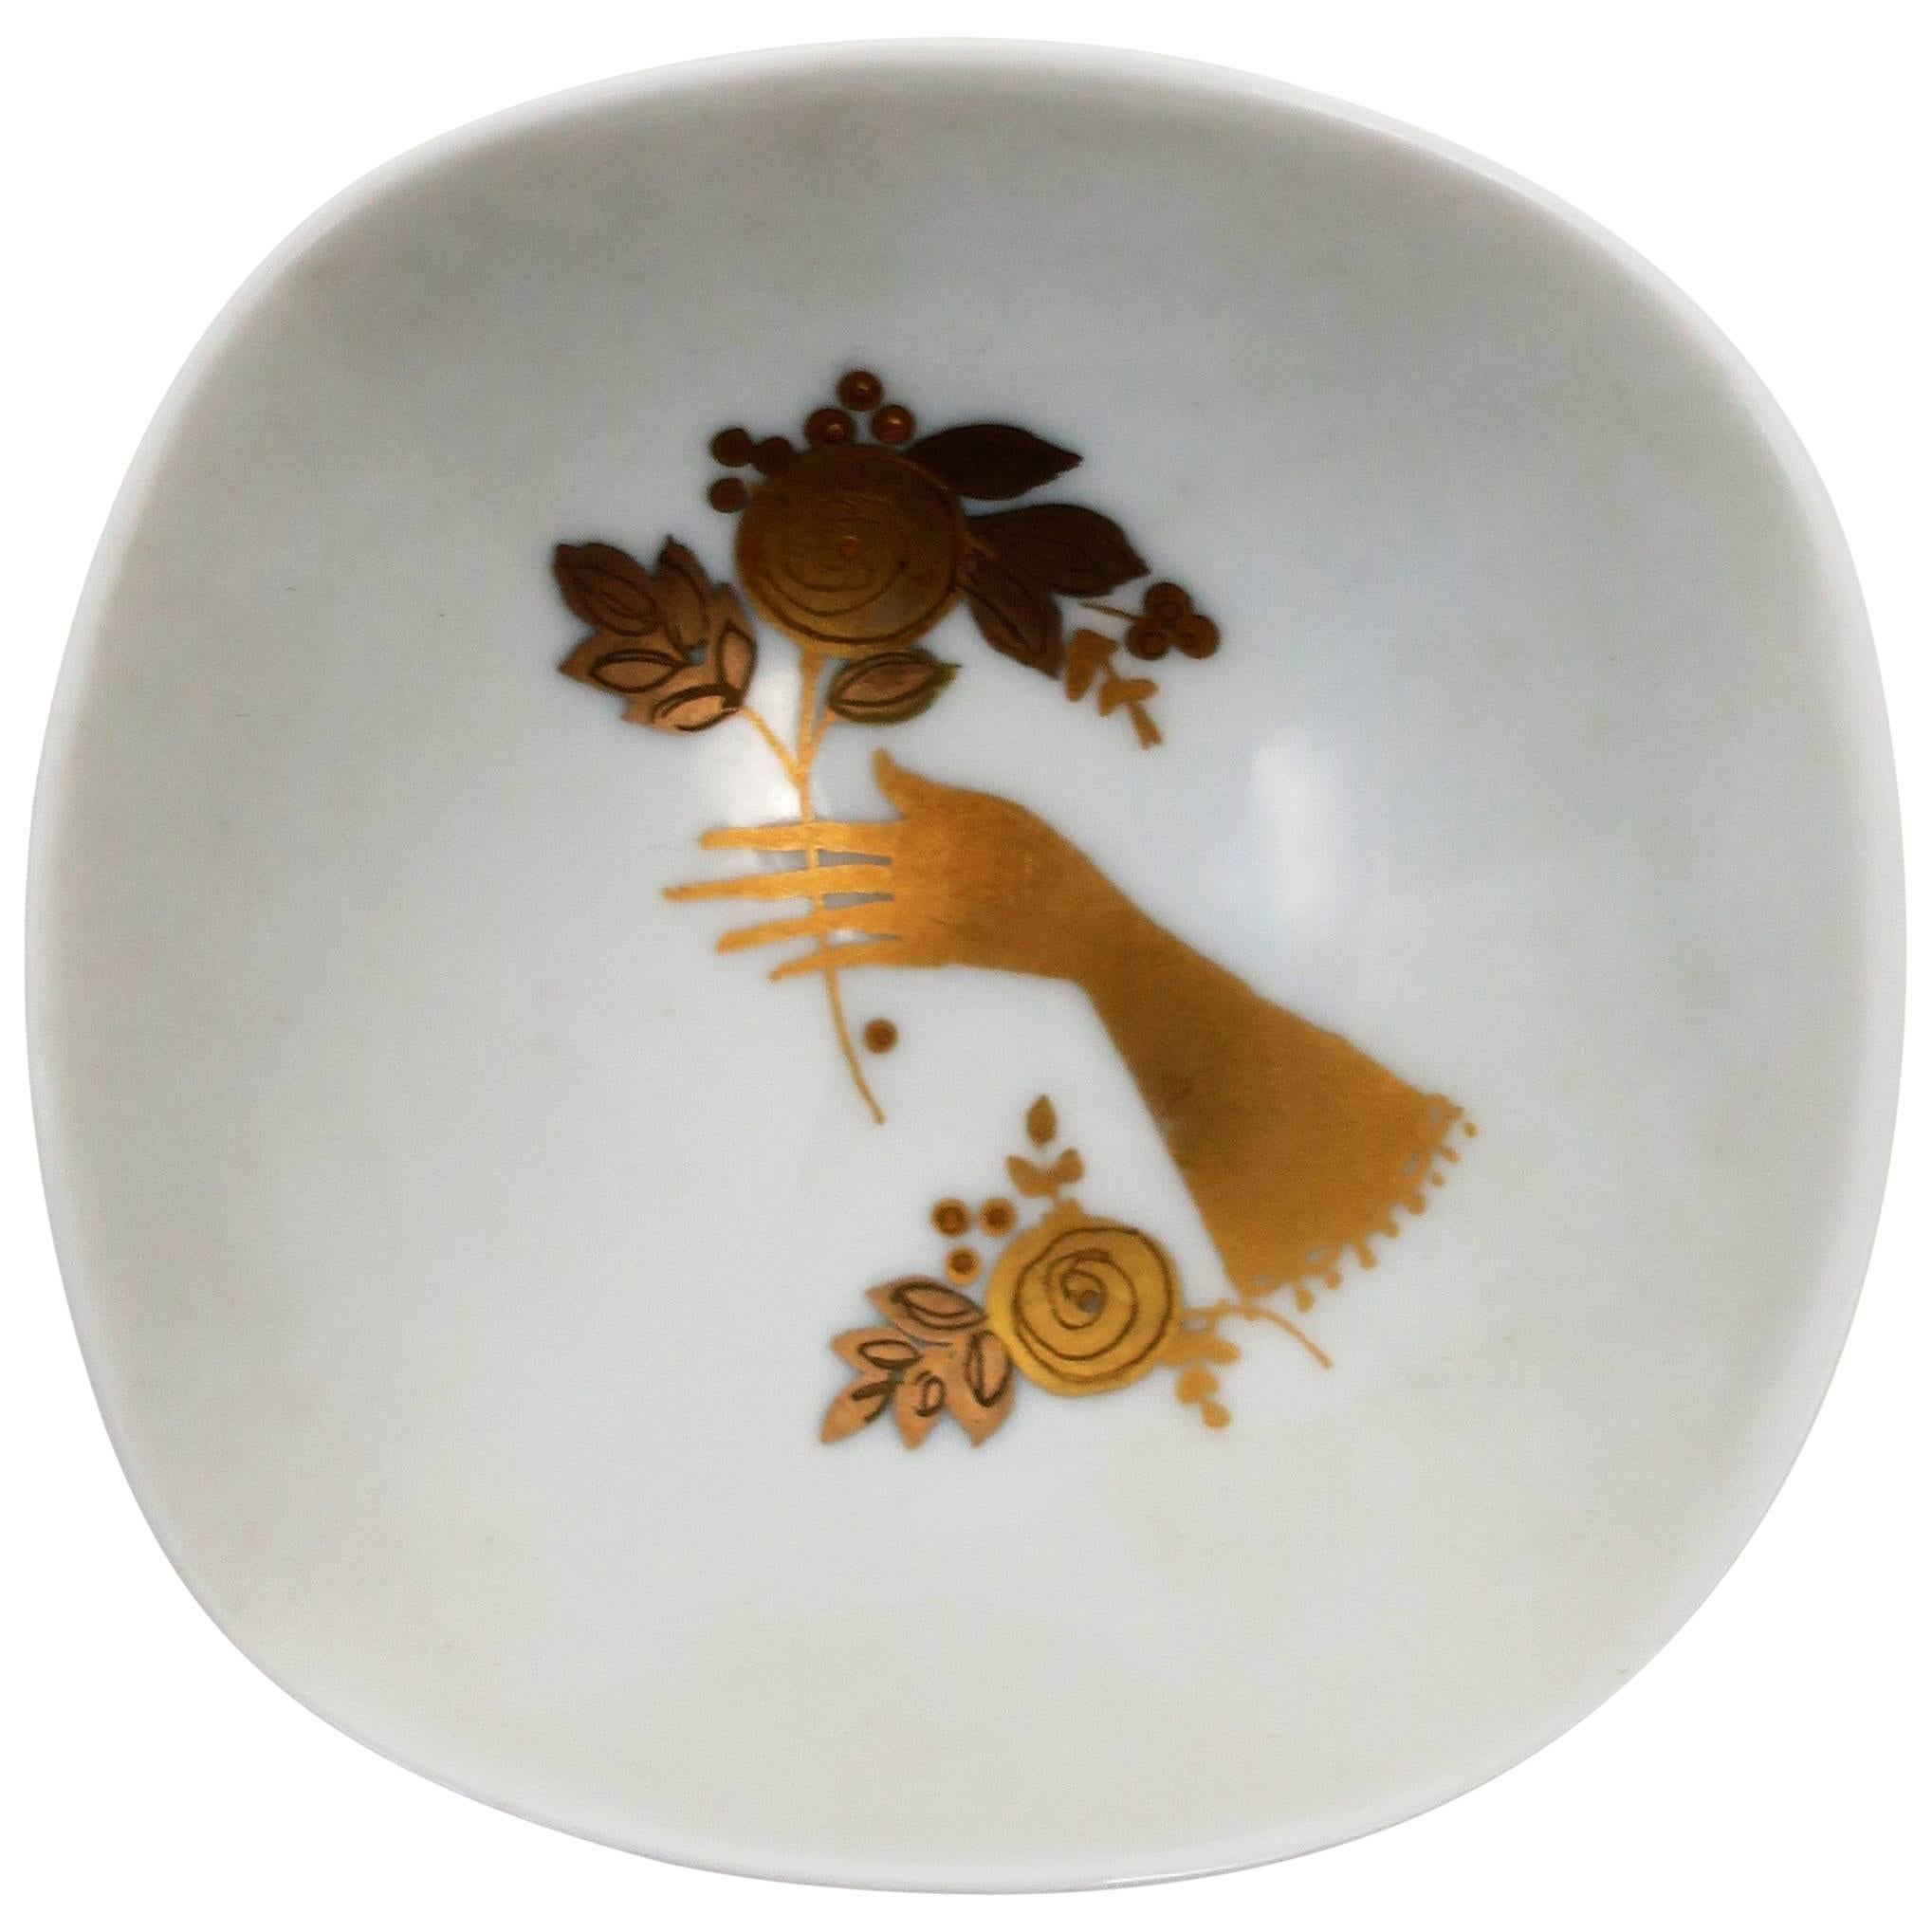 German White and Gold Jewelry Dish by Rosenthal, 20th Century